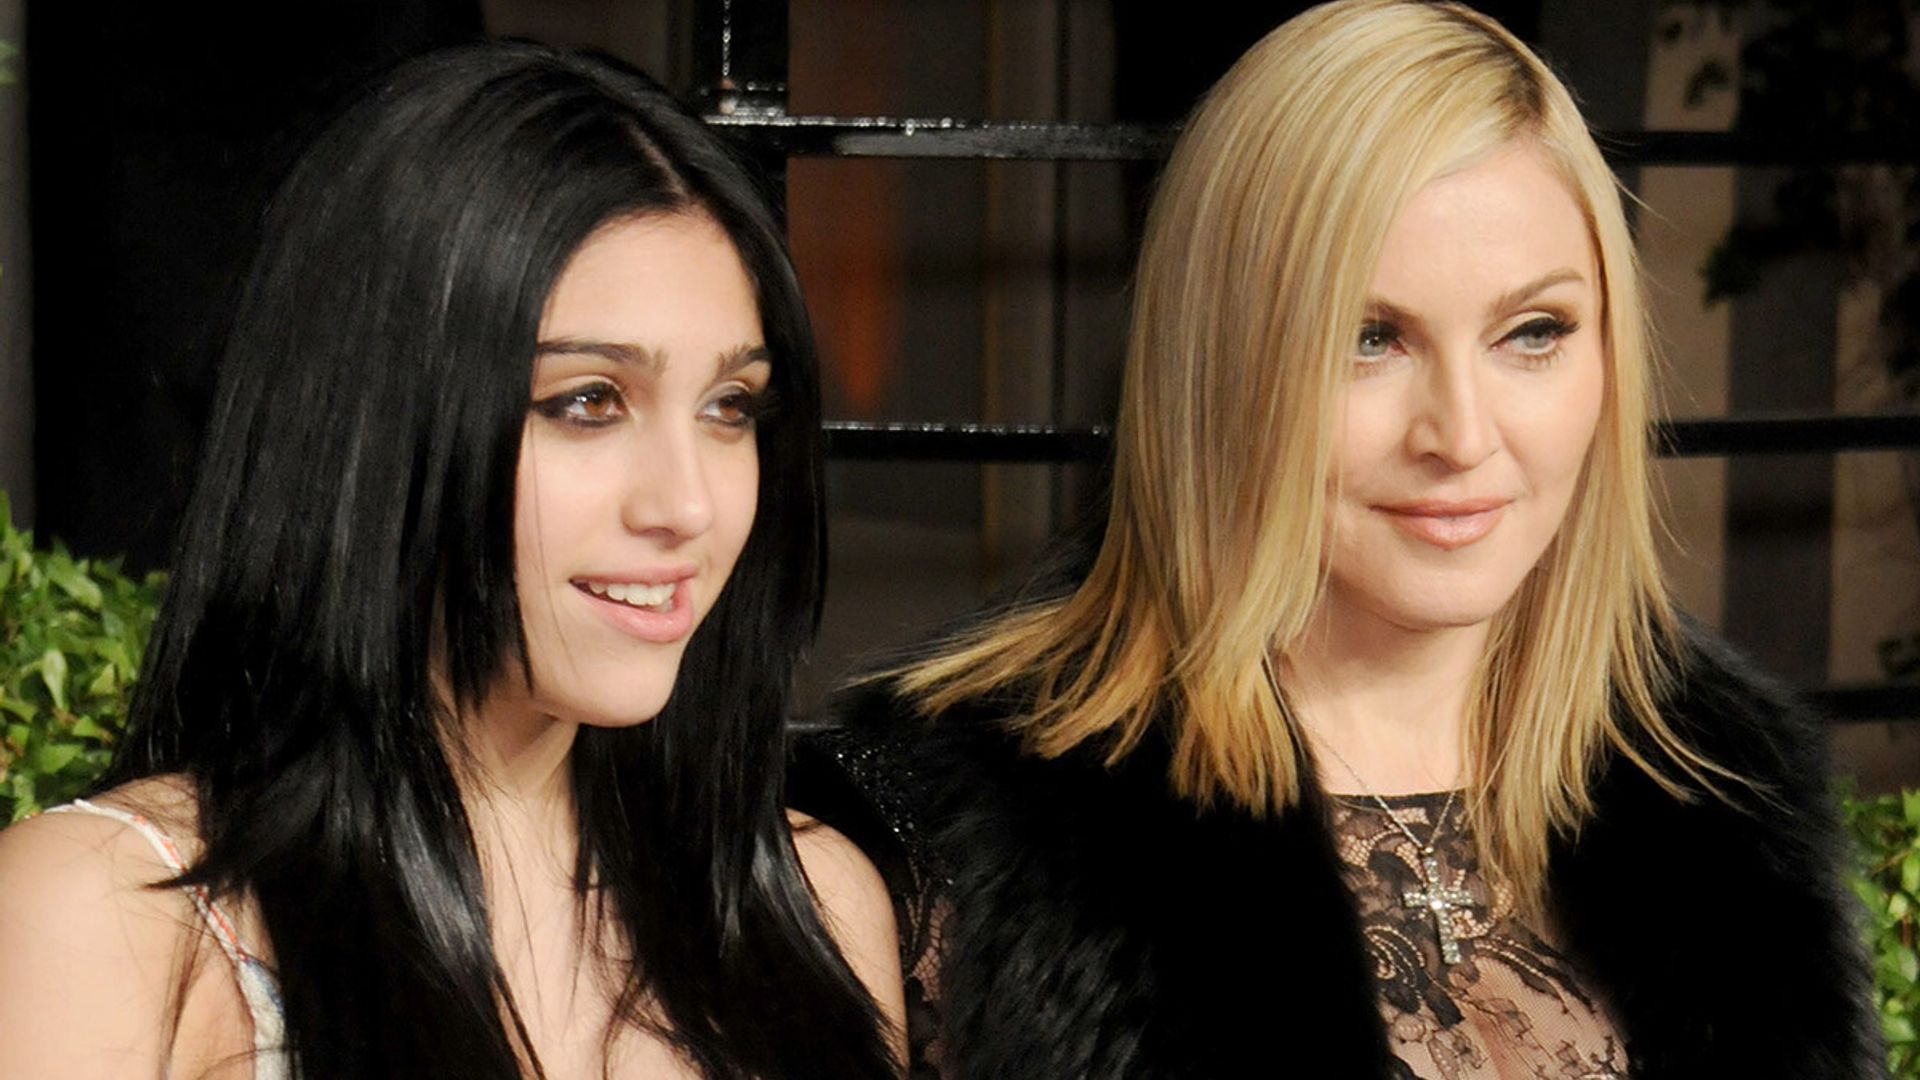 Madonna's daughter Lourdes Leon sizzles in see-through bodysuit in revealing photo